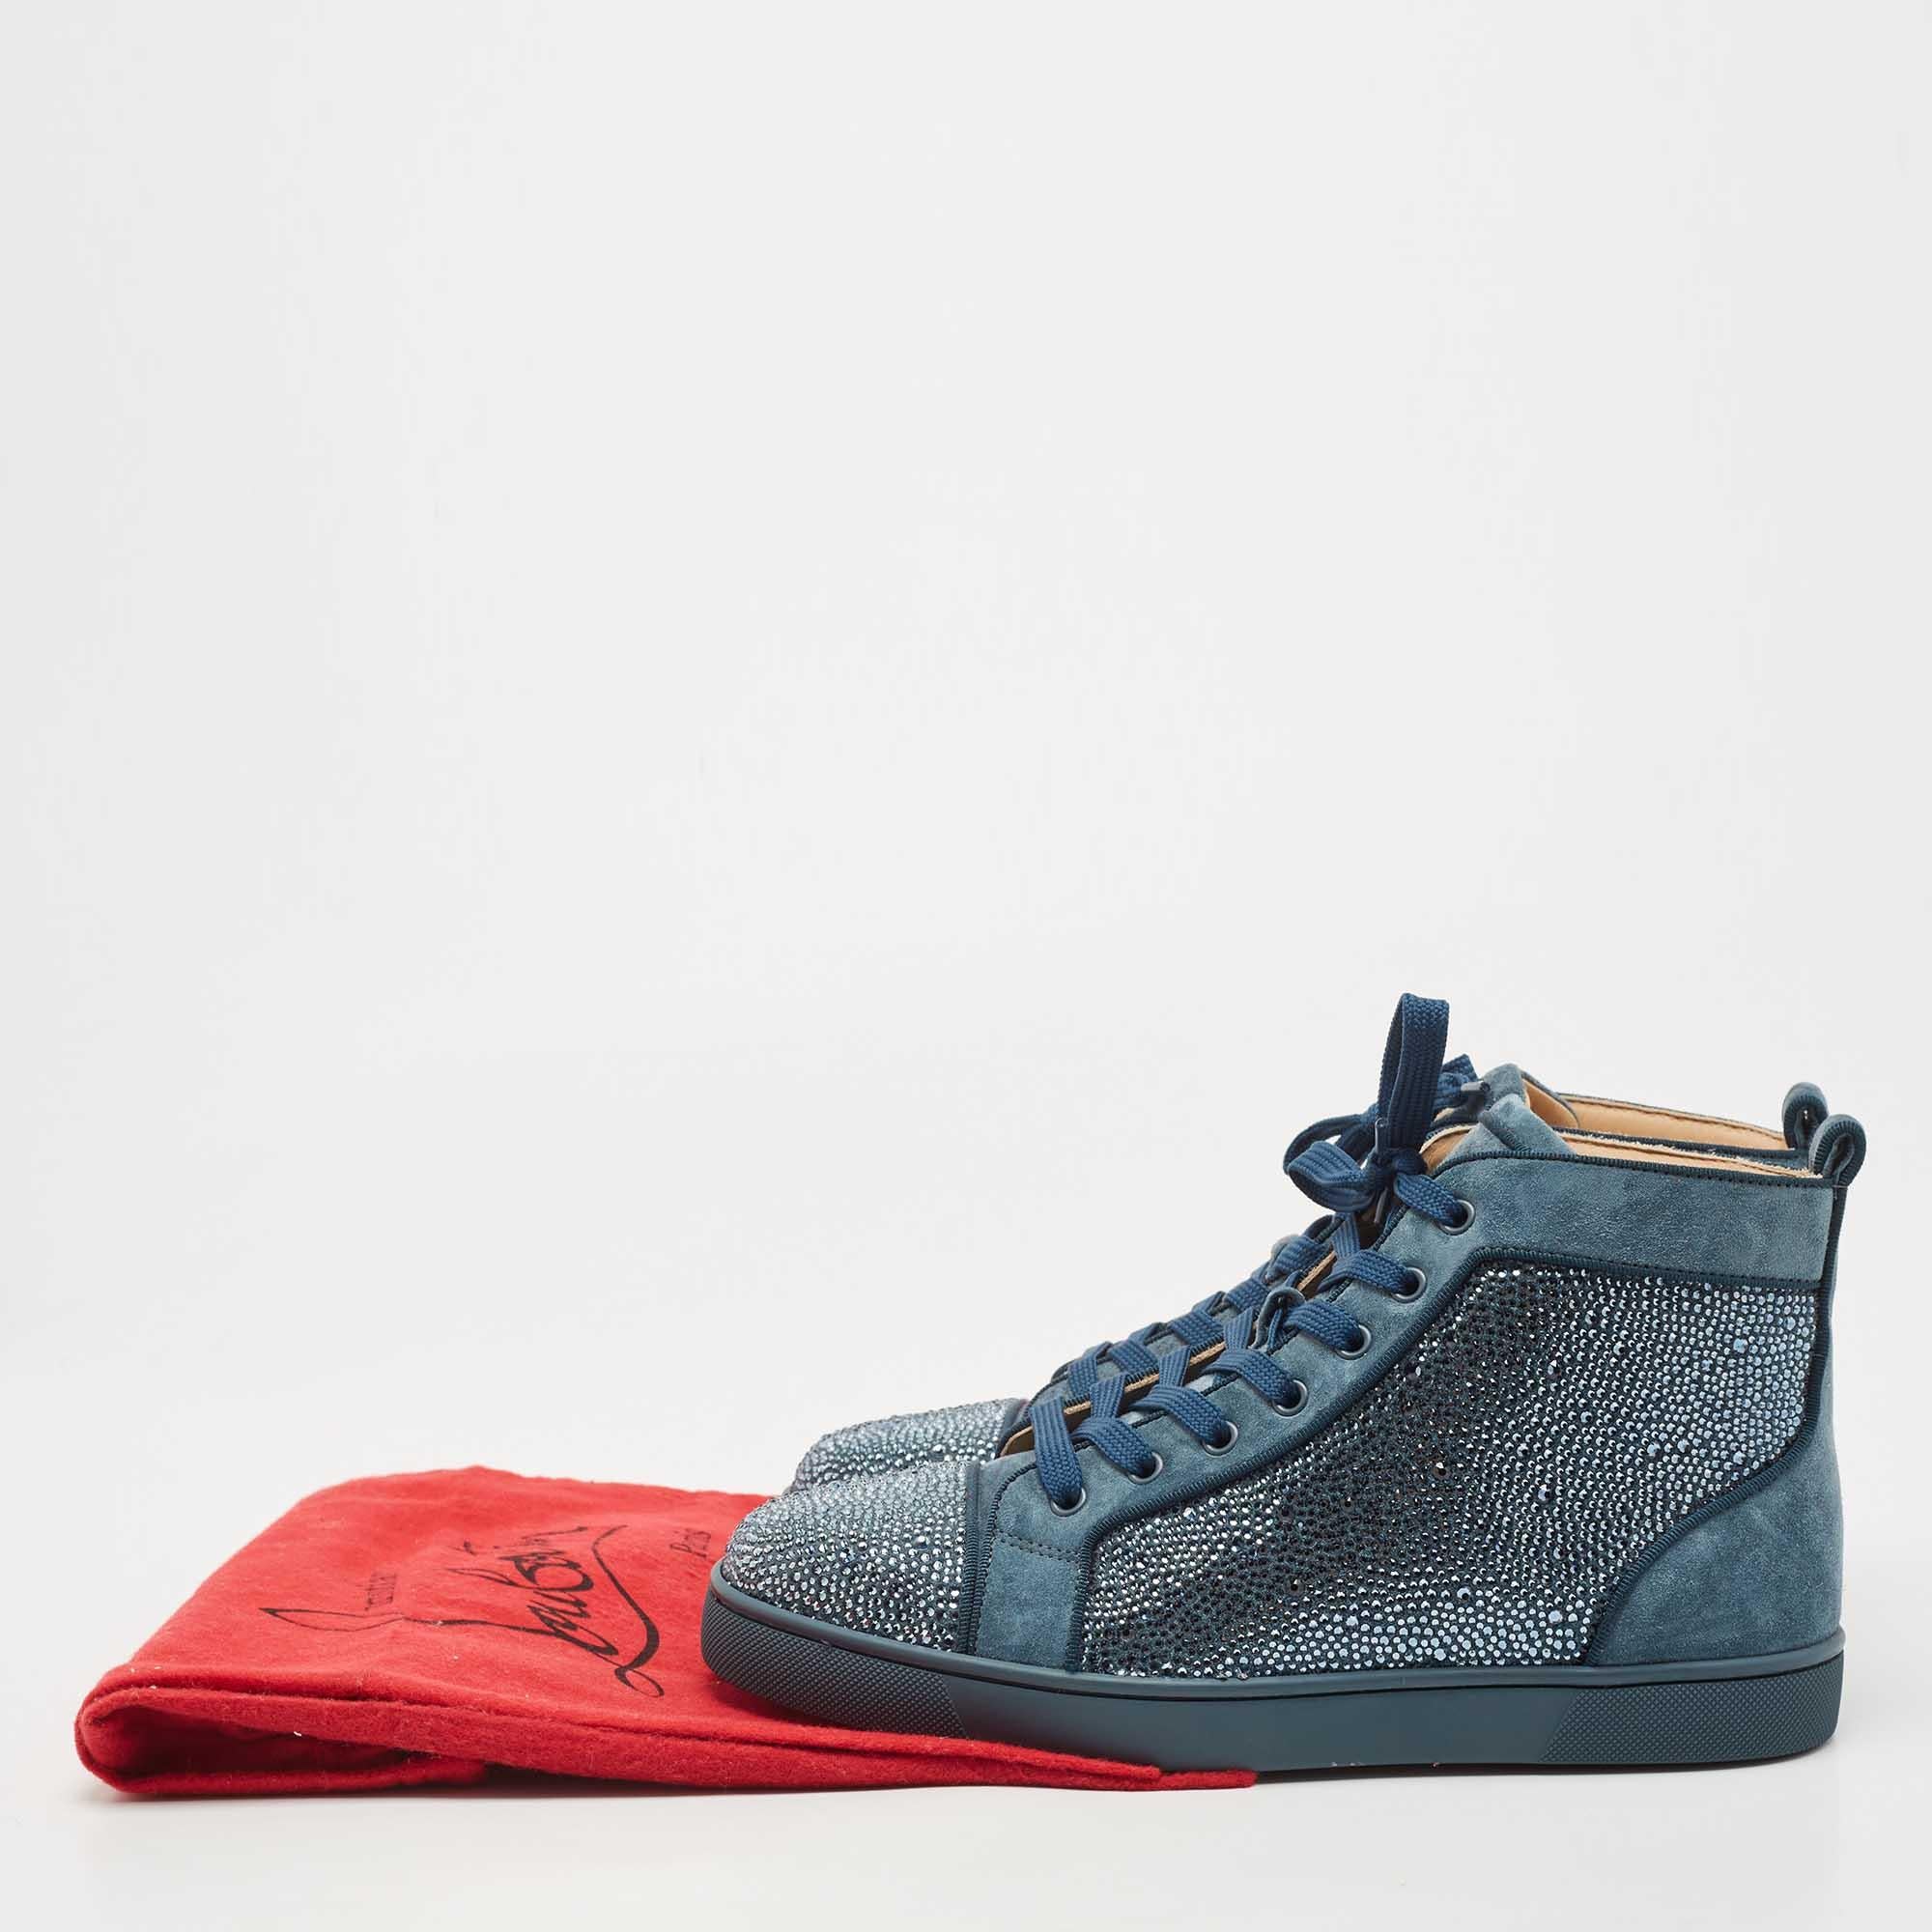 Christian Louboutin Grey Suede Louis Strass High Top Sneakers Size 41 5